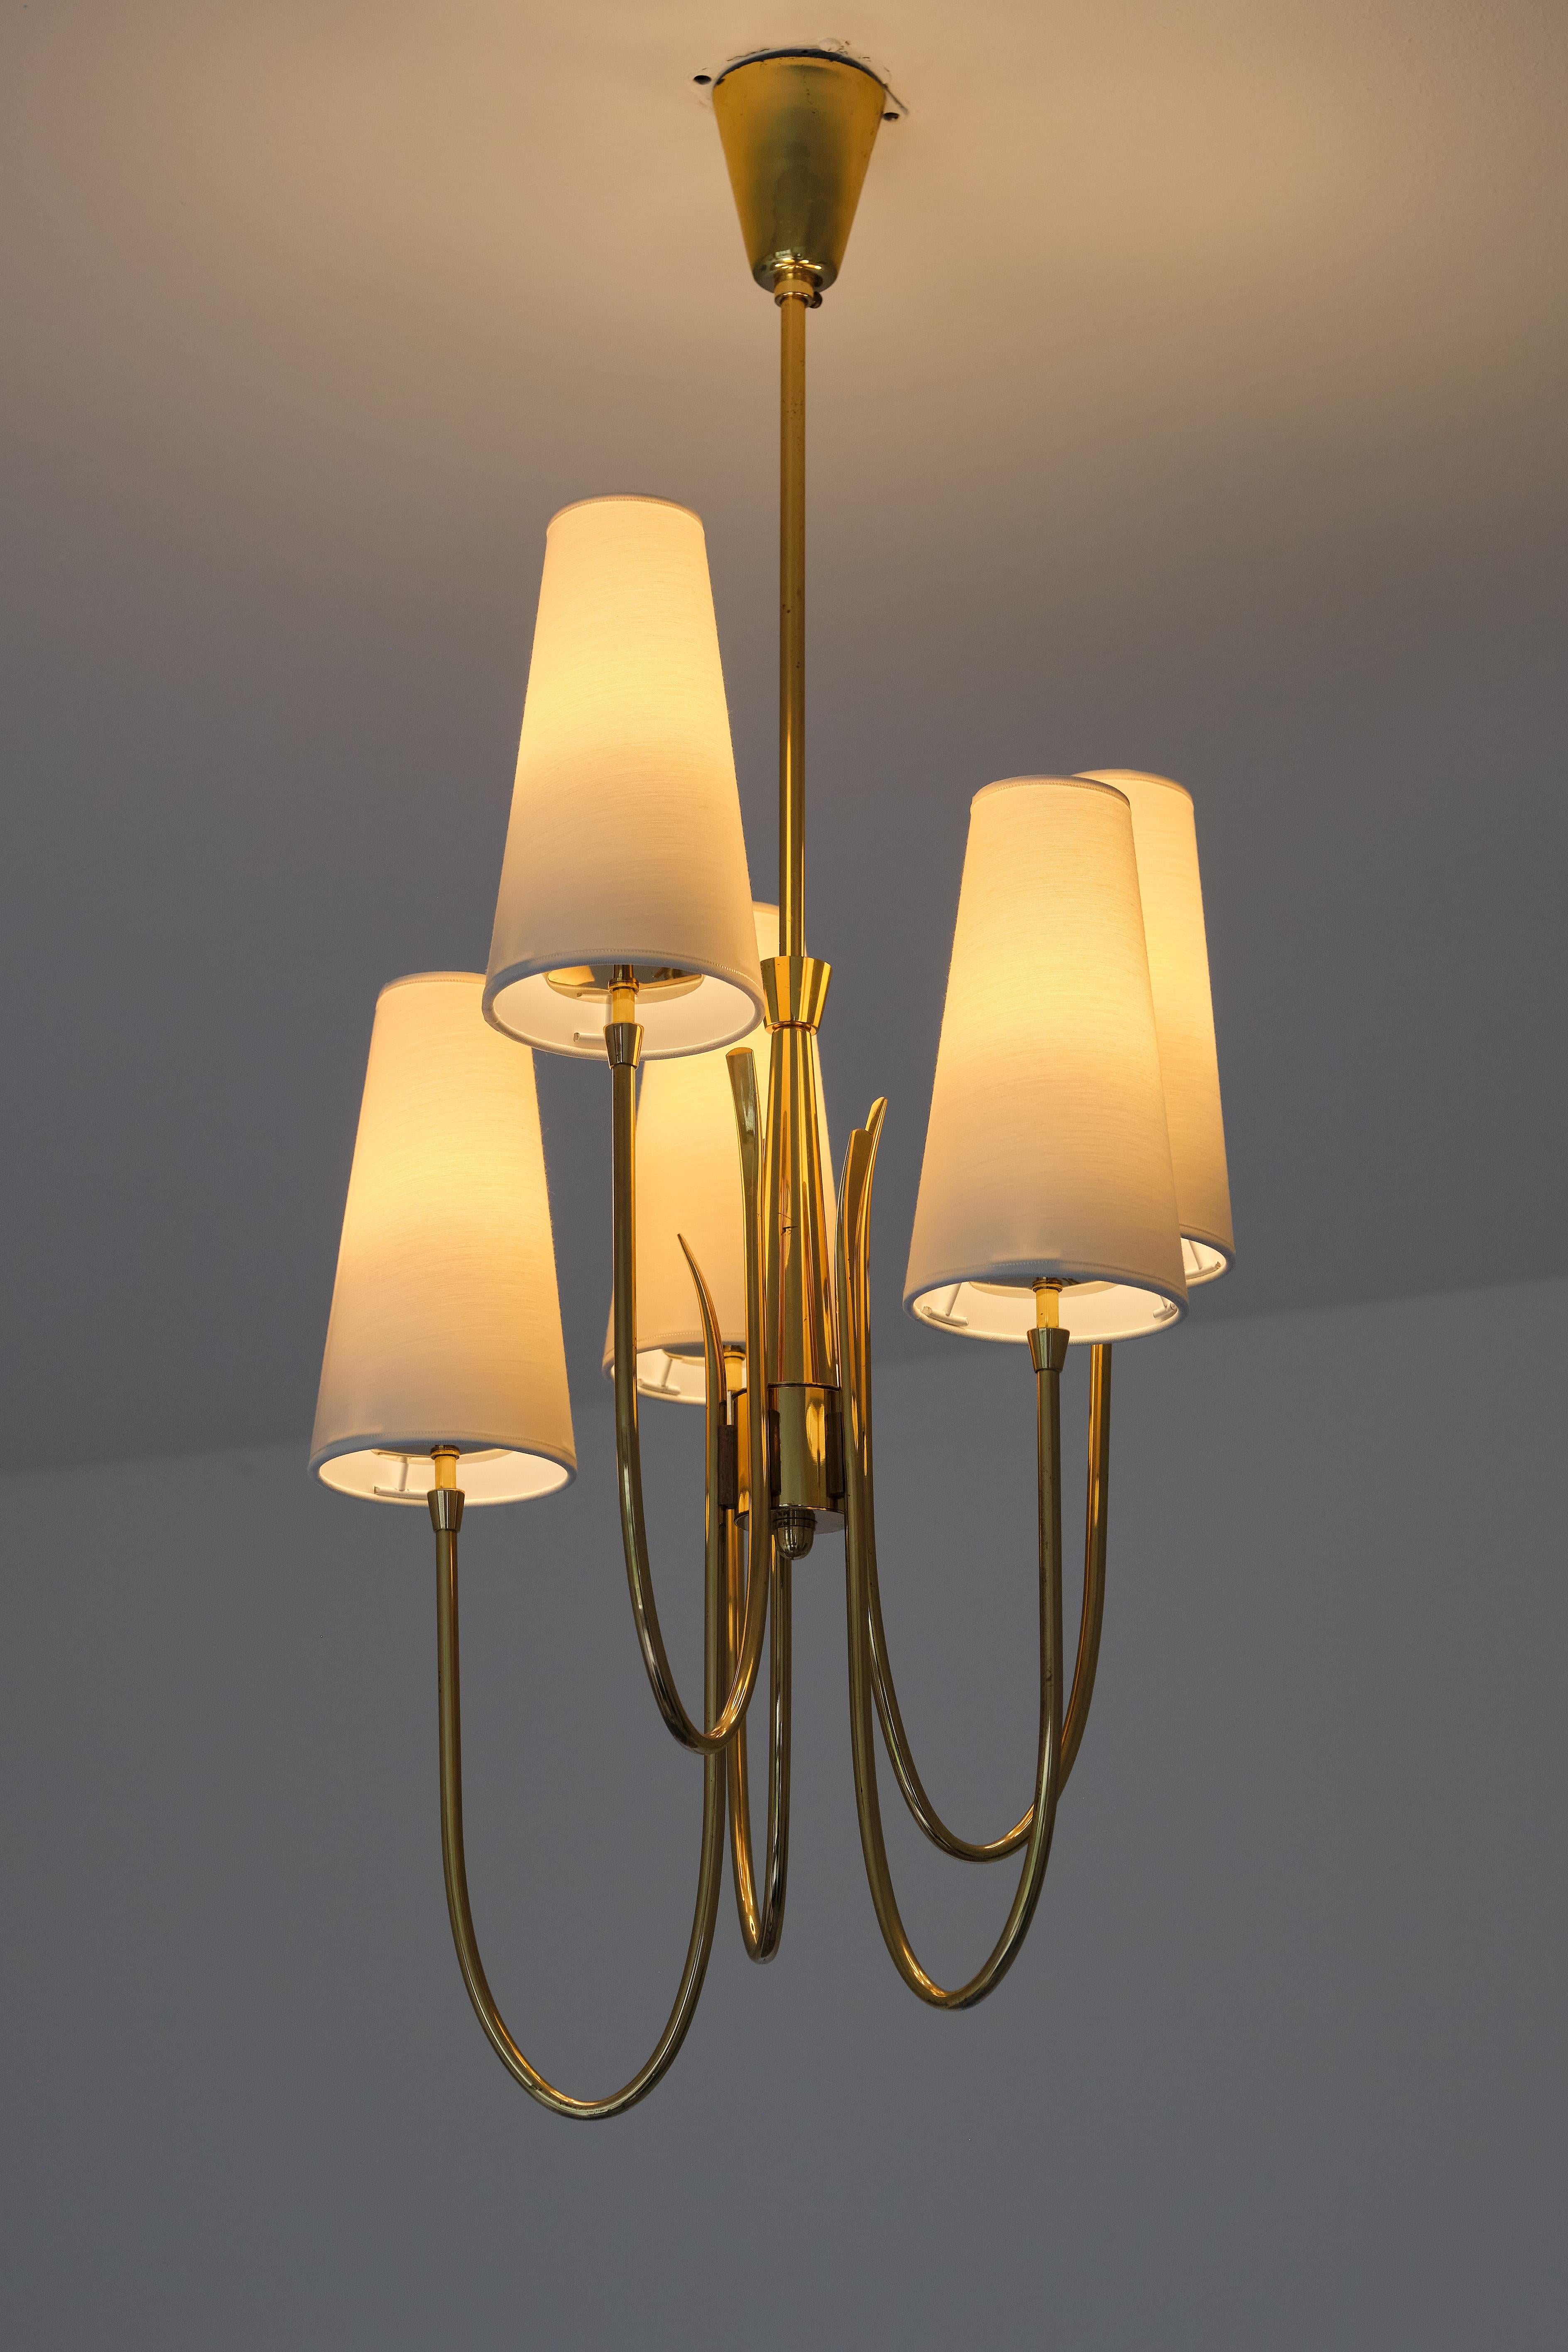 Mid-Century Modern Guglielmo Ulrich Attributed Five Arm Chandelier, Brass and Fabric, Italy, 1940s